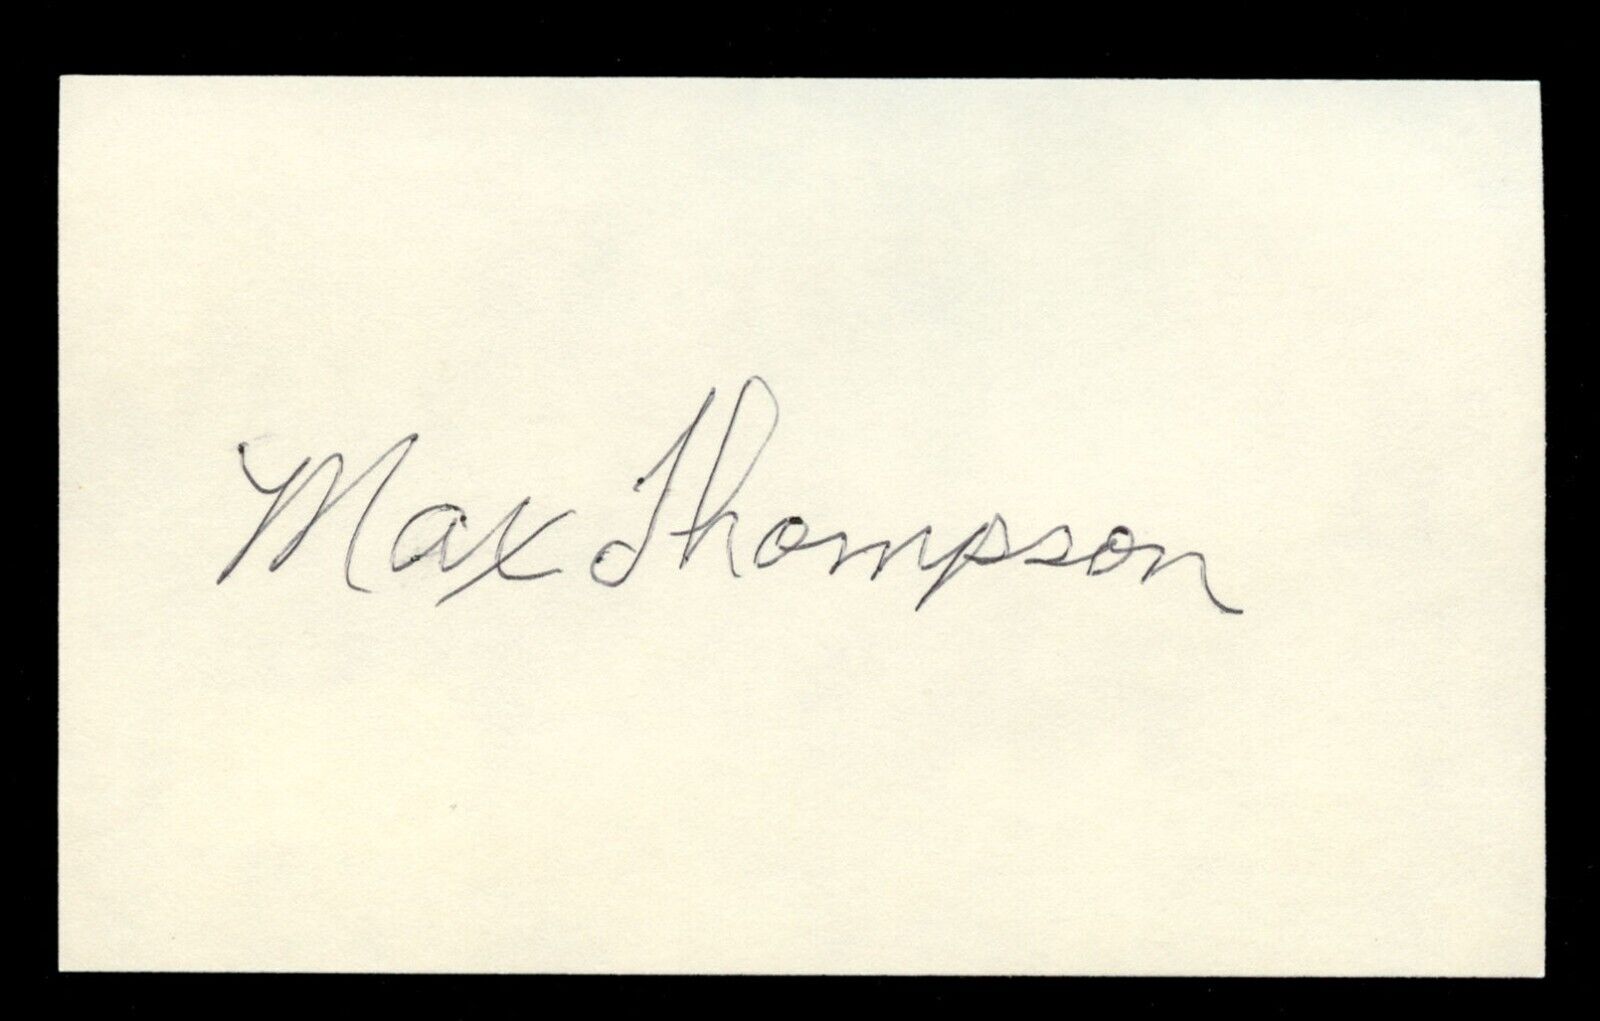 Max Thompson d1996 signed autograph 3x5 card Medal of Honor WWII Army BAS Cert